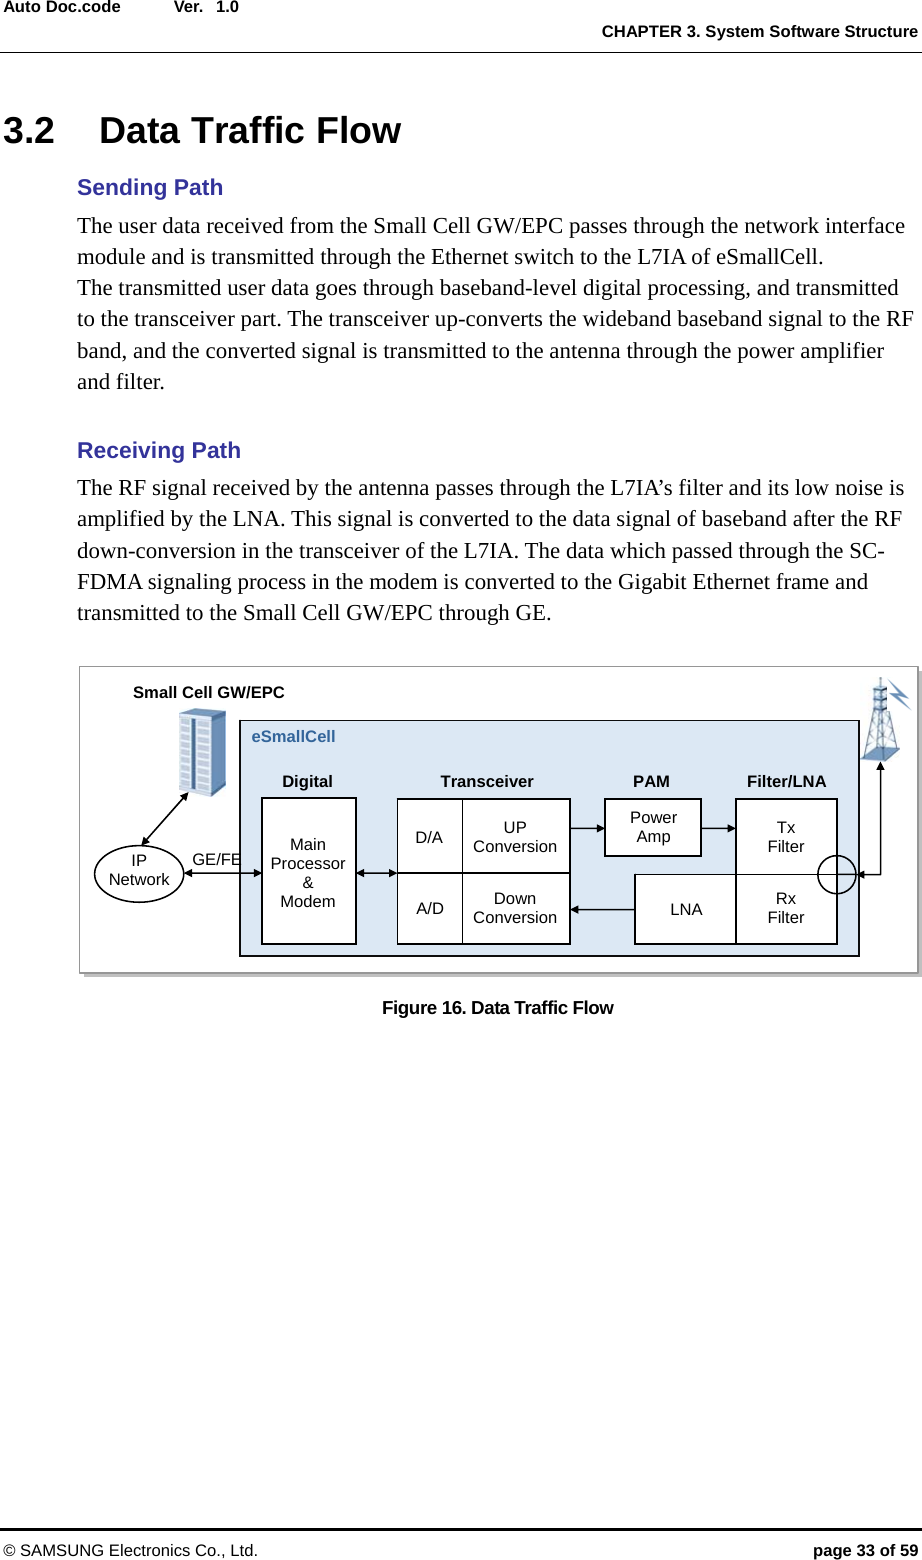  Ver.  CHAPTER 3. System Software Structure © SAMSUNG Electronics Co., Ltd.  page 33 of 59 Auto Doc.code  1.0 3.2  Data Traffic Flow Sending Path The user data received from the Small Cell GW/EPC passes through the network interface module and is transmitted through the Ethernet switch to the L7IA of eSmallCell.   The transmitted user data goes through baseband-level digital processing, and transmitted to the transceiver part. The transceiver up-converts the wideband baseband signal to the RF band, and the converted signal is transmitted to the antenna through the power amplifier and filter.  Receiving Path The RF signal received by the antenna passes through the L7IA’s filter and its low noise is amplified by the LNA. This signal is converted to the data signal of baseband after the RF down-conversion in the transceiver of the L7IA. The data which passed through the SC-FDMA signaling process in the modem is converted to the Gigabit Ethernet frame and transmitted to the Small Cell GW/EPC through GE.  Figure 16. Data Traffic Flow  Main Processor&amp; Modem Digital Small Cell GW/EPC Transceiver  PAM  Filter/LNA IP Network  GE/FE D/A A/D UP Conversion Down Conversion Power Amp LNA Tx Filter Rx Filter eSmallCell 